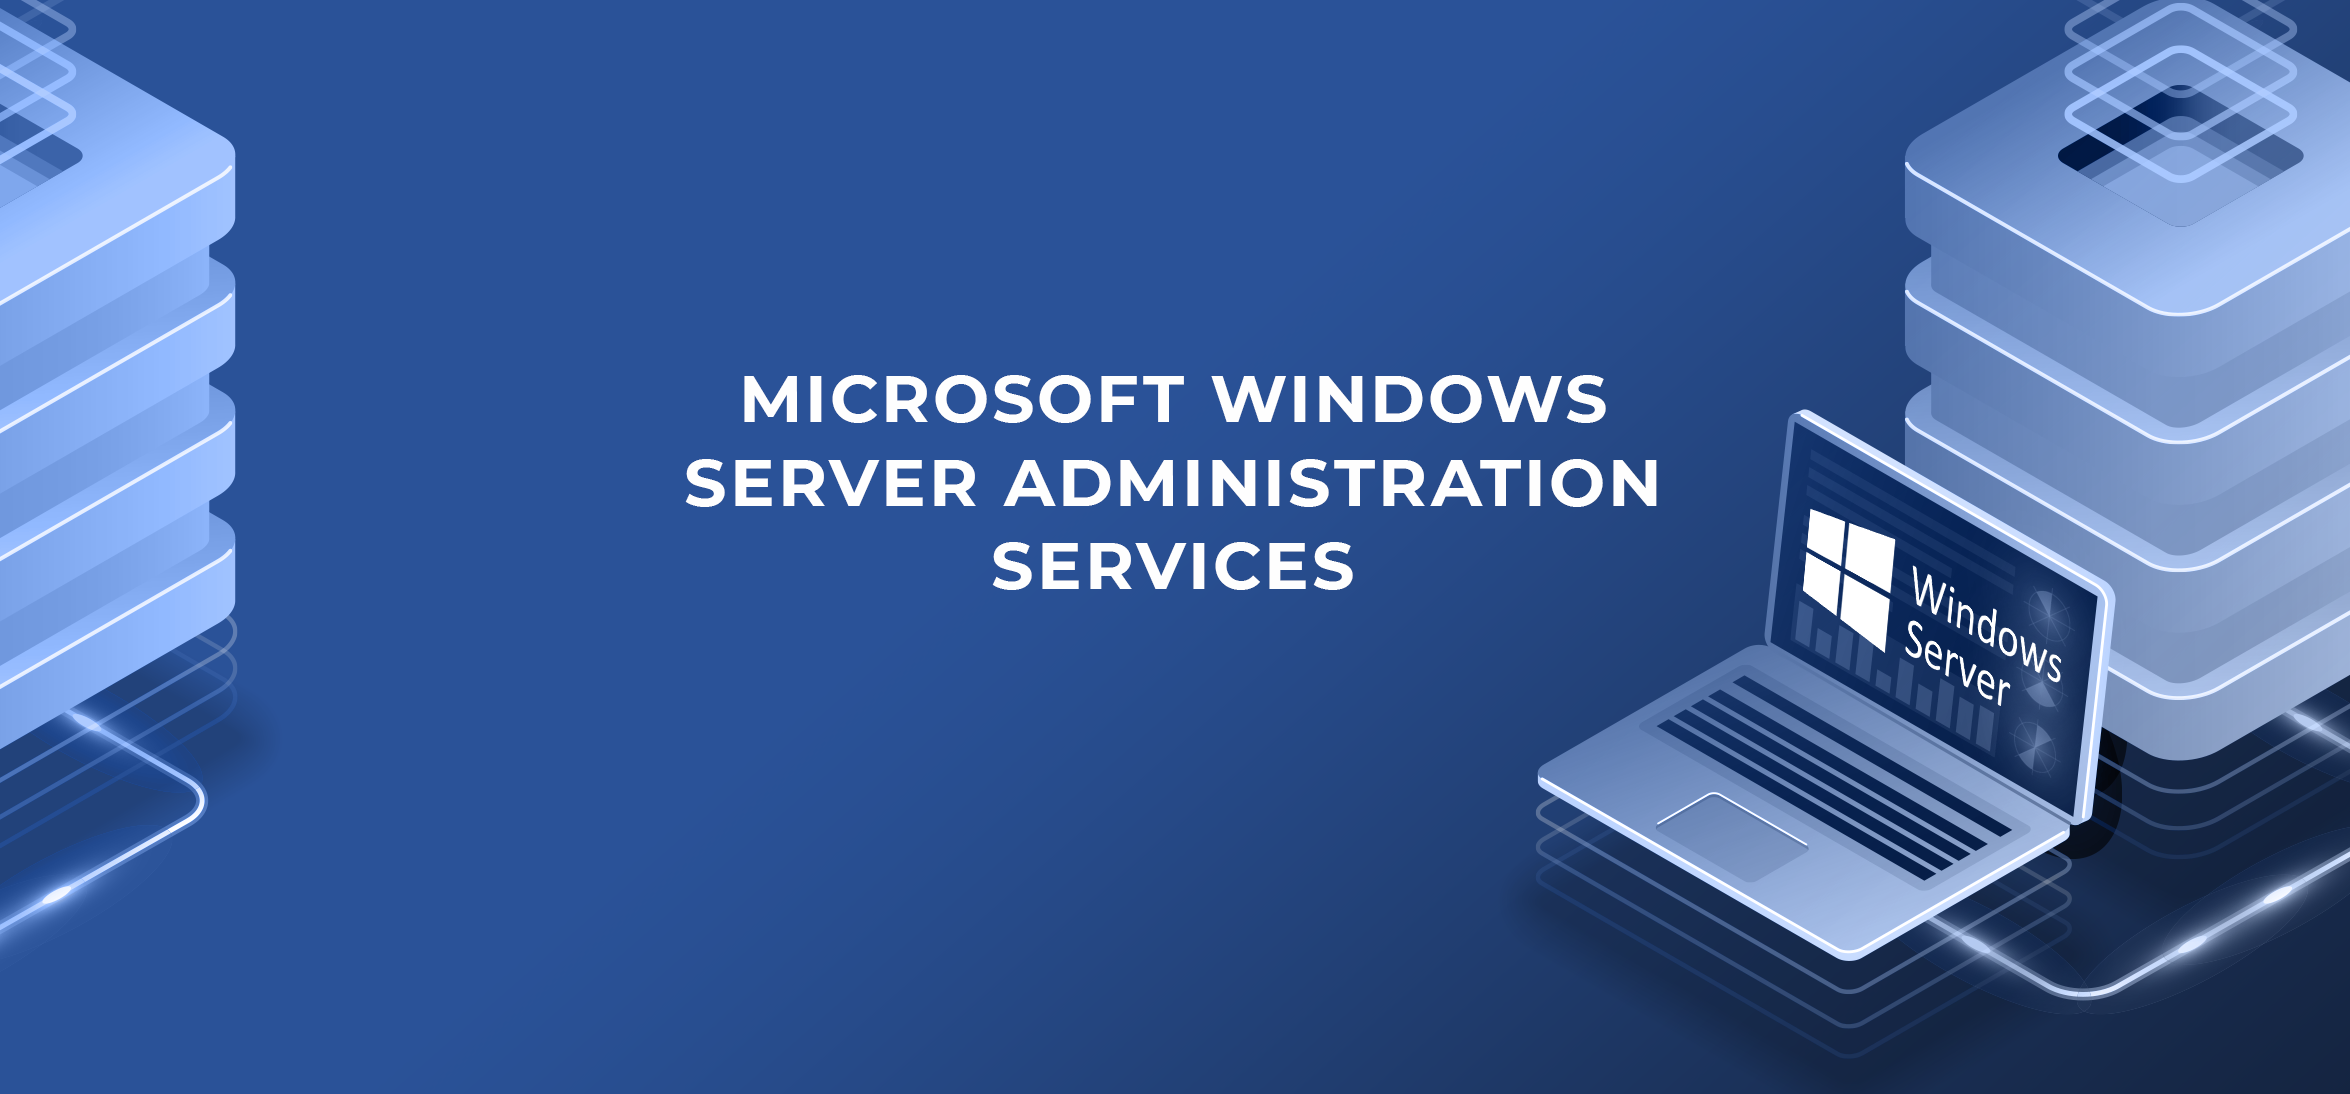 Effective Windows Server Administration and Support Solution Provider in Aguanga CA, 92536